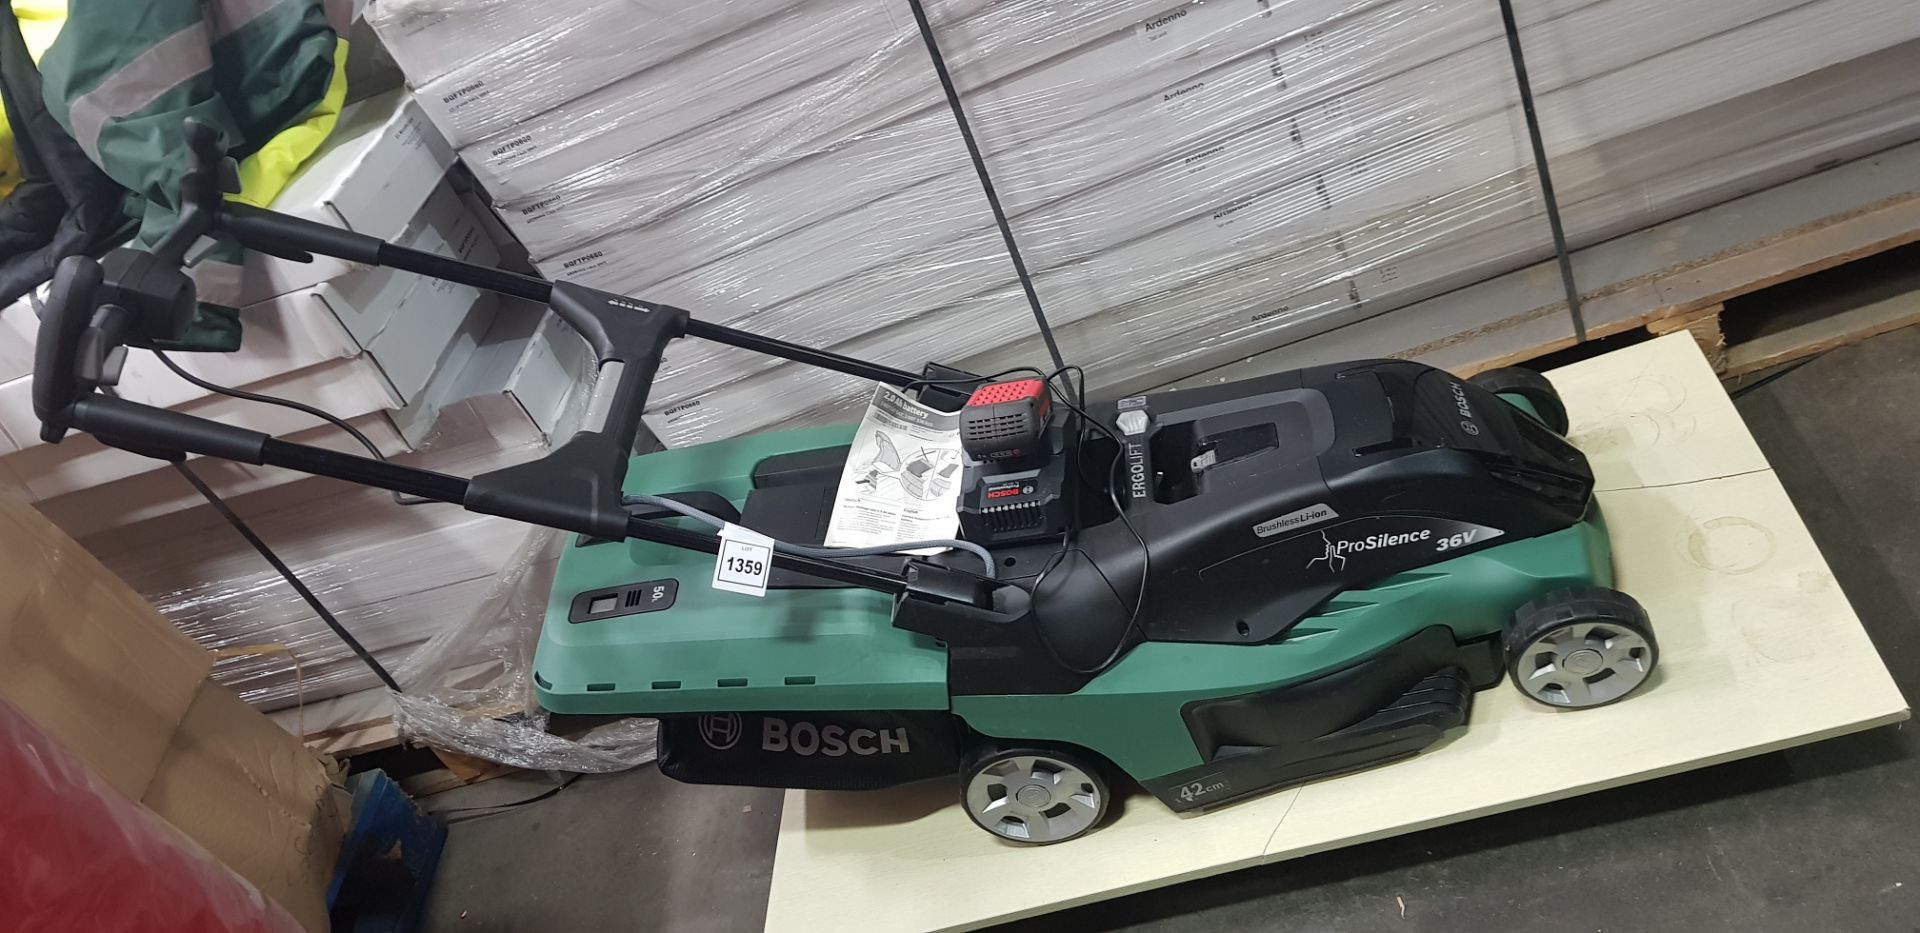 1 X BOSCH ADVANCED ROTAK 36 V PRO SILENCE LAWNMOWER - INCLUDES 2 BATTERYS AND CHARGER ( VERY GOOD